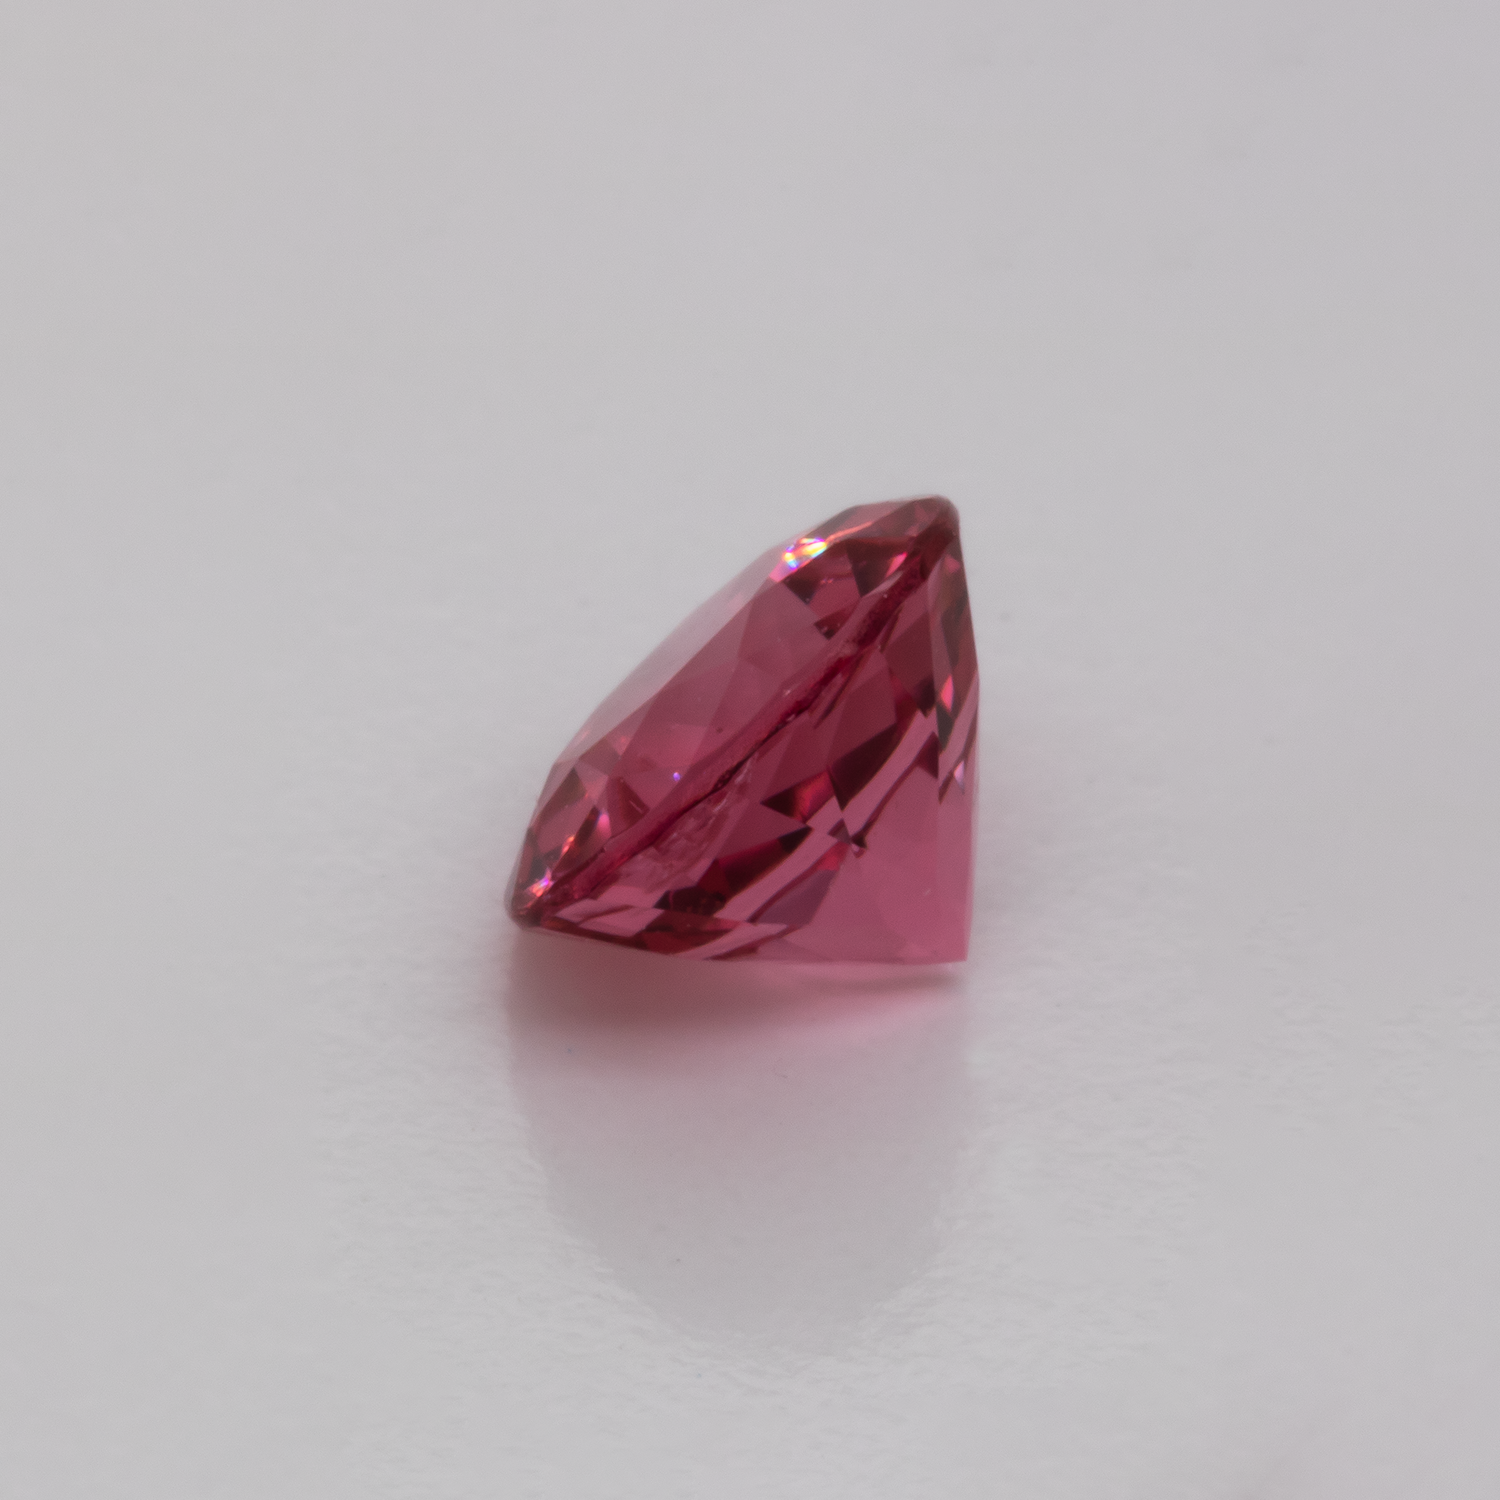 Spinell - rosa, rund, 5,7x5,7 mm, 0,85 cts, Nr. SP90021